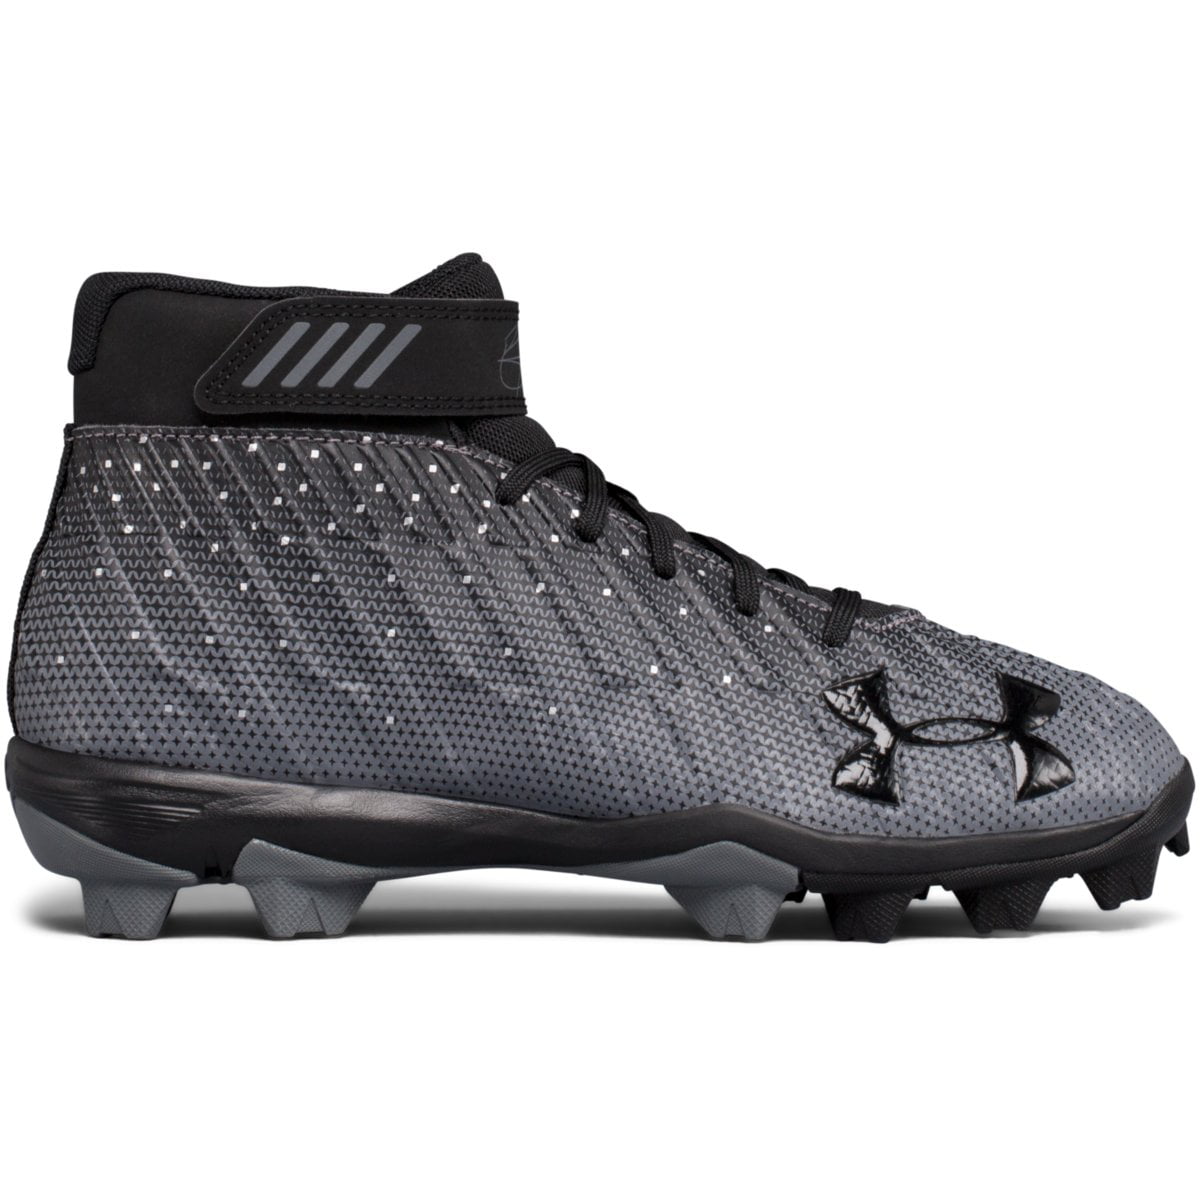 under armour youth baseball cleats harper